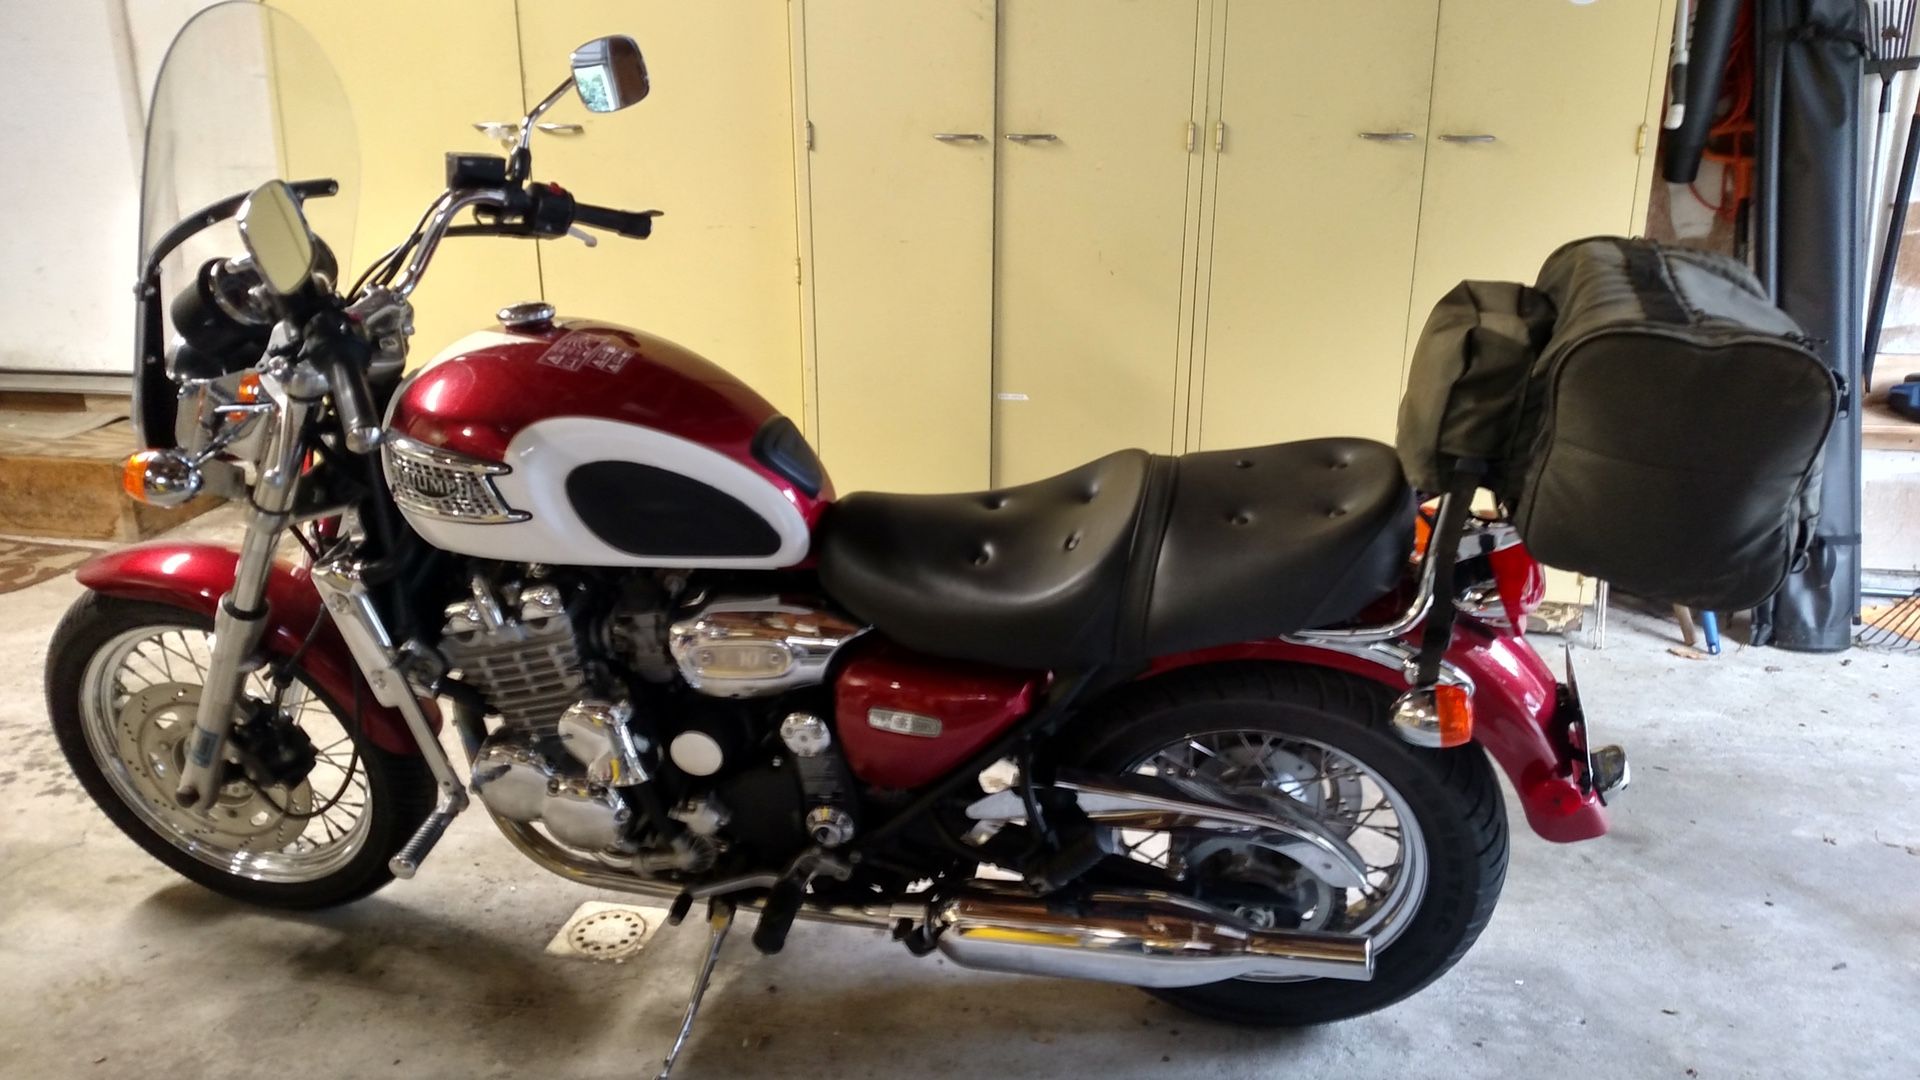 2002 Triumph Thunderbird 900 with only 9500 miles